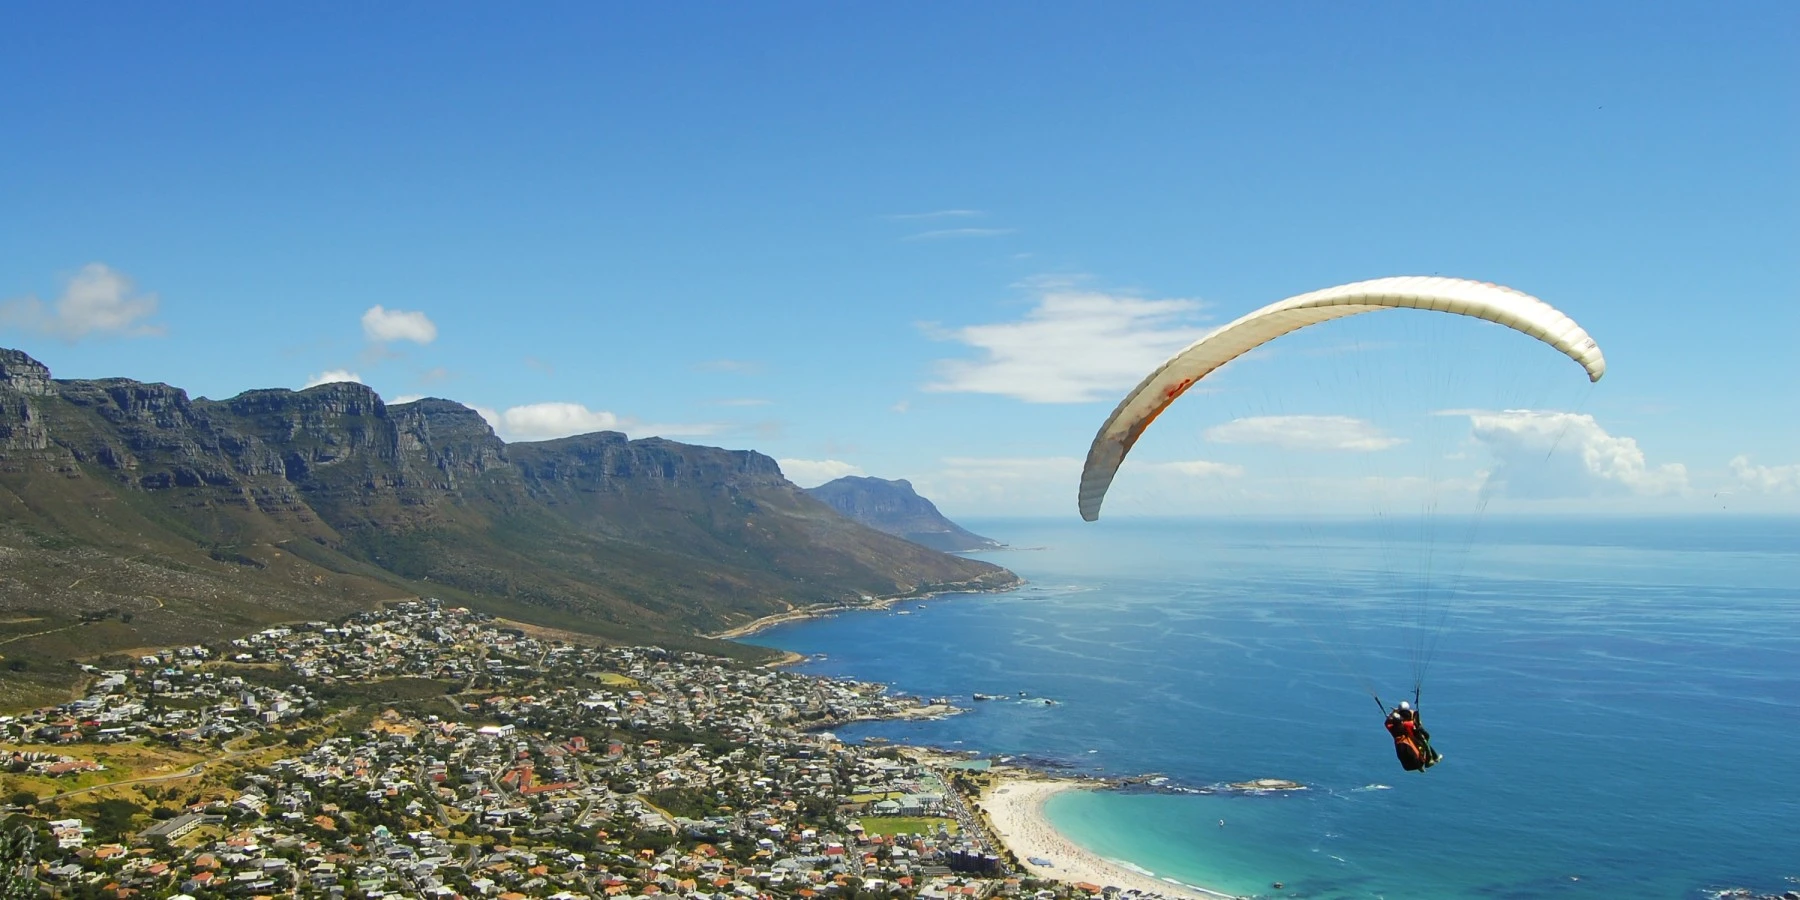 Paragliding spots in Cape Town